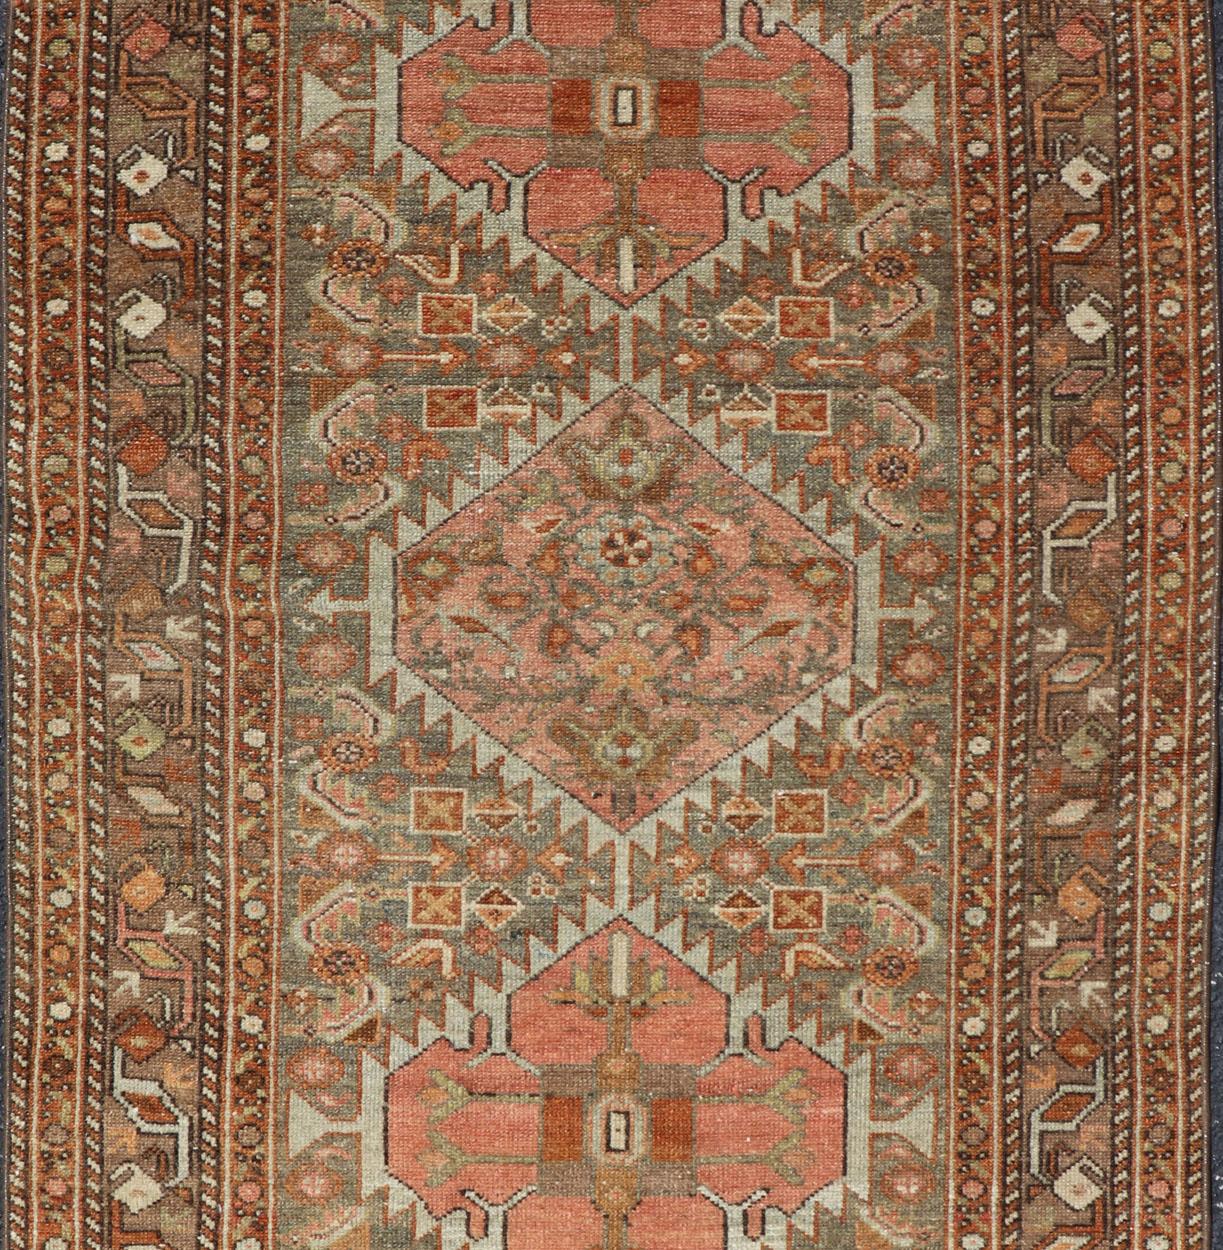 This antique hamadan features three medallions in the field, surrounded by sub-geometric tribal motifs. The complementary border displays a geometric tribal design, wrapping around the entirety of the rug. Rendered in rusty reds, bronze, terracotta,